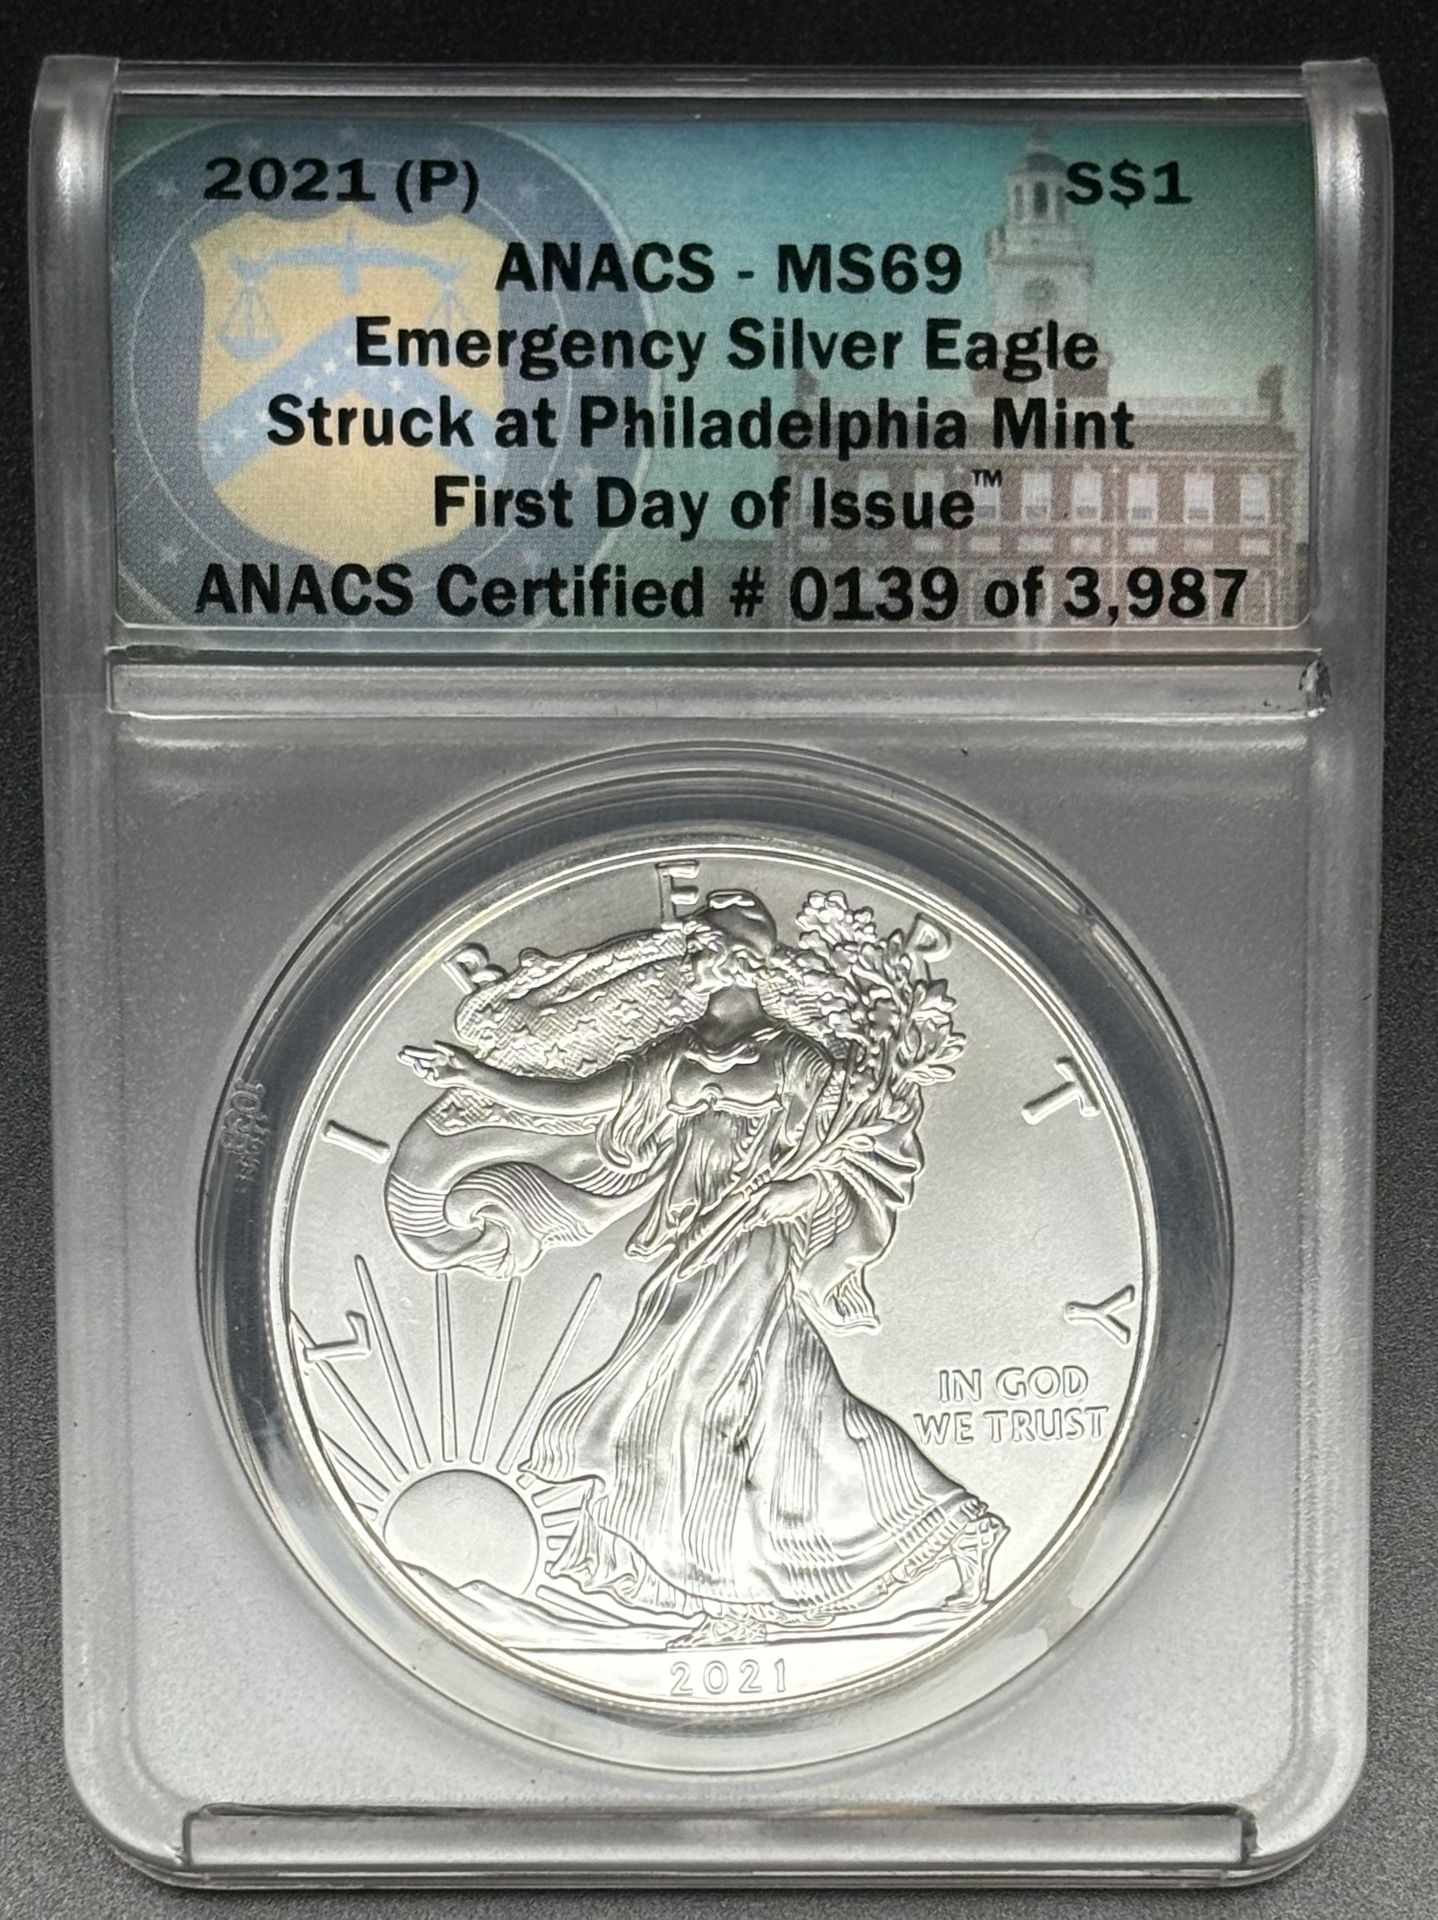 2021 (P) SILVER EAGLE ANACS MS69 EMERGENCY ISSUE STRUCK AT PHILADELPHIA MINT